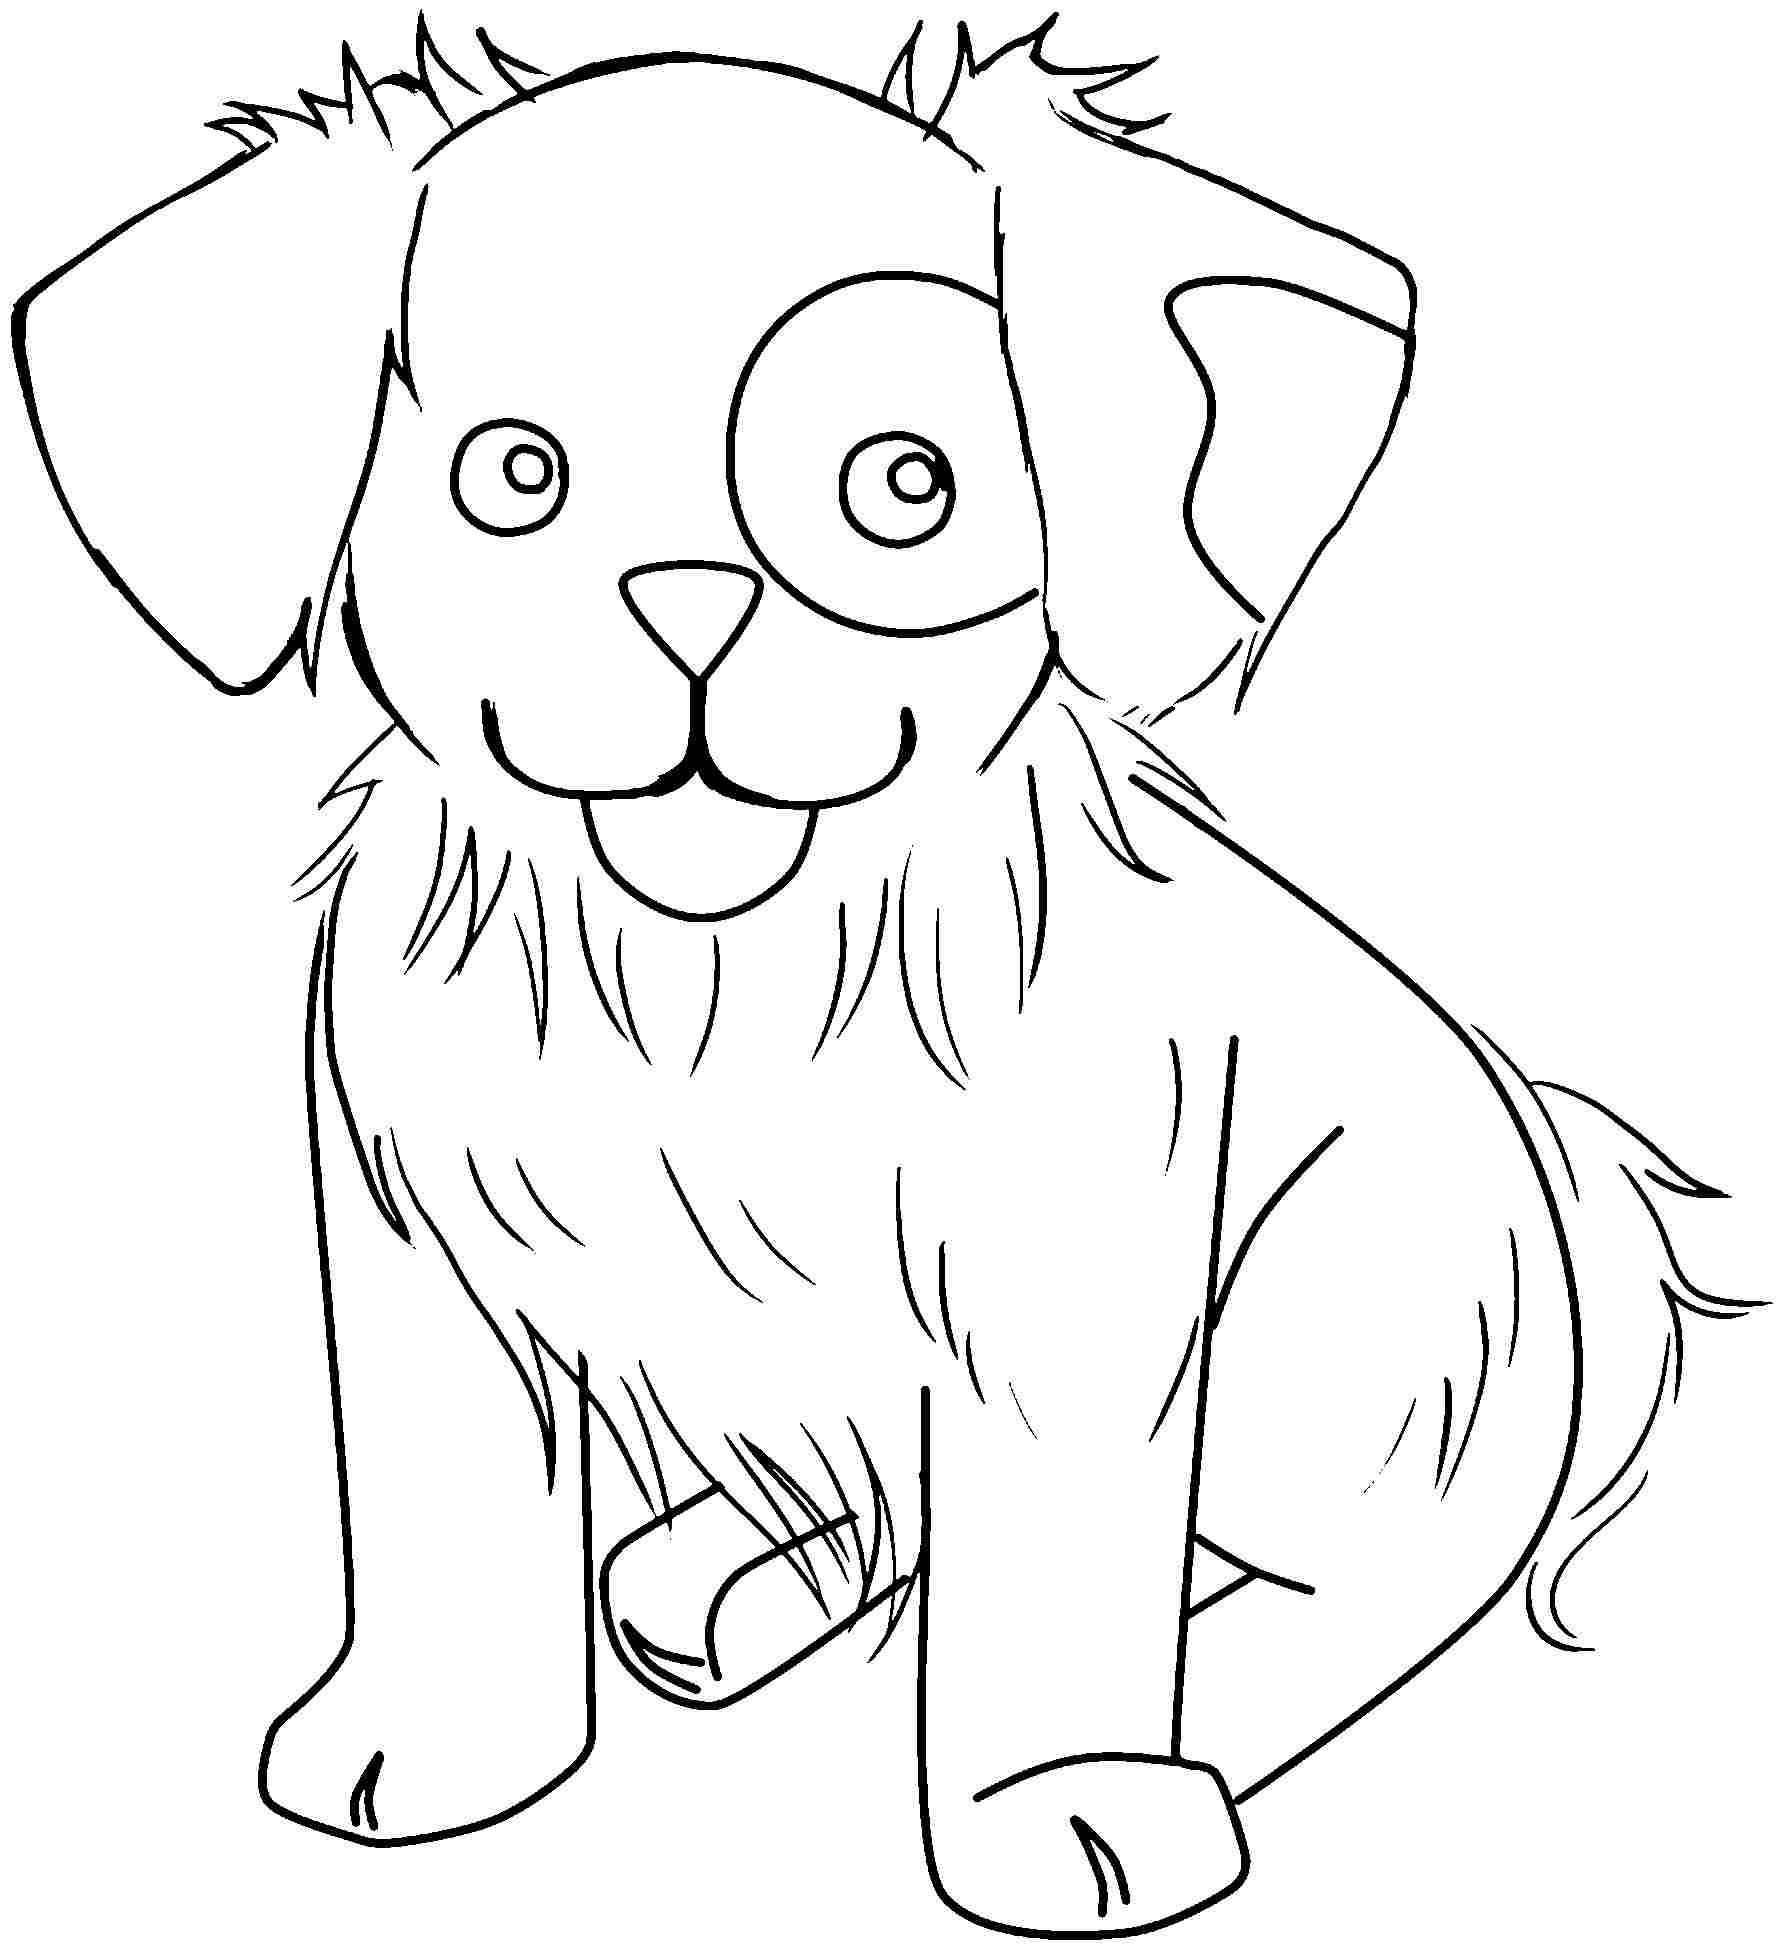 free-free-printable-cute-animal-coloring-pages-download-free-free-printable-cute-animal